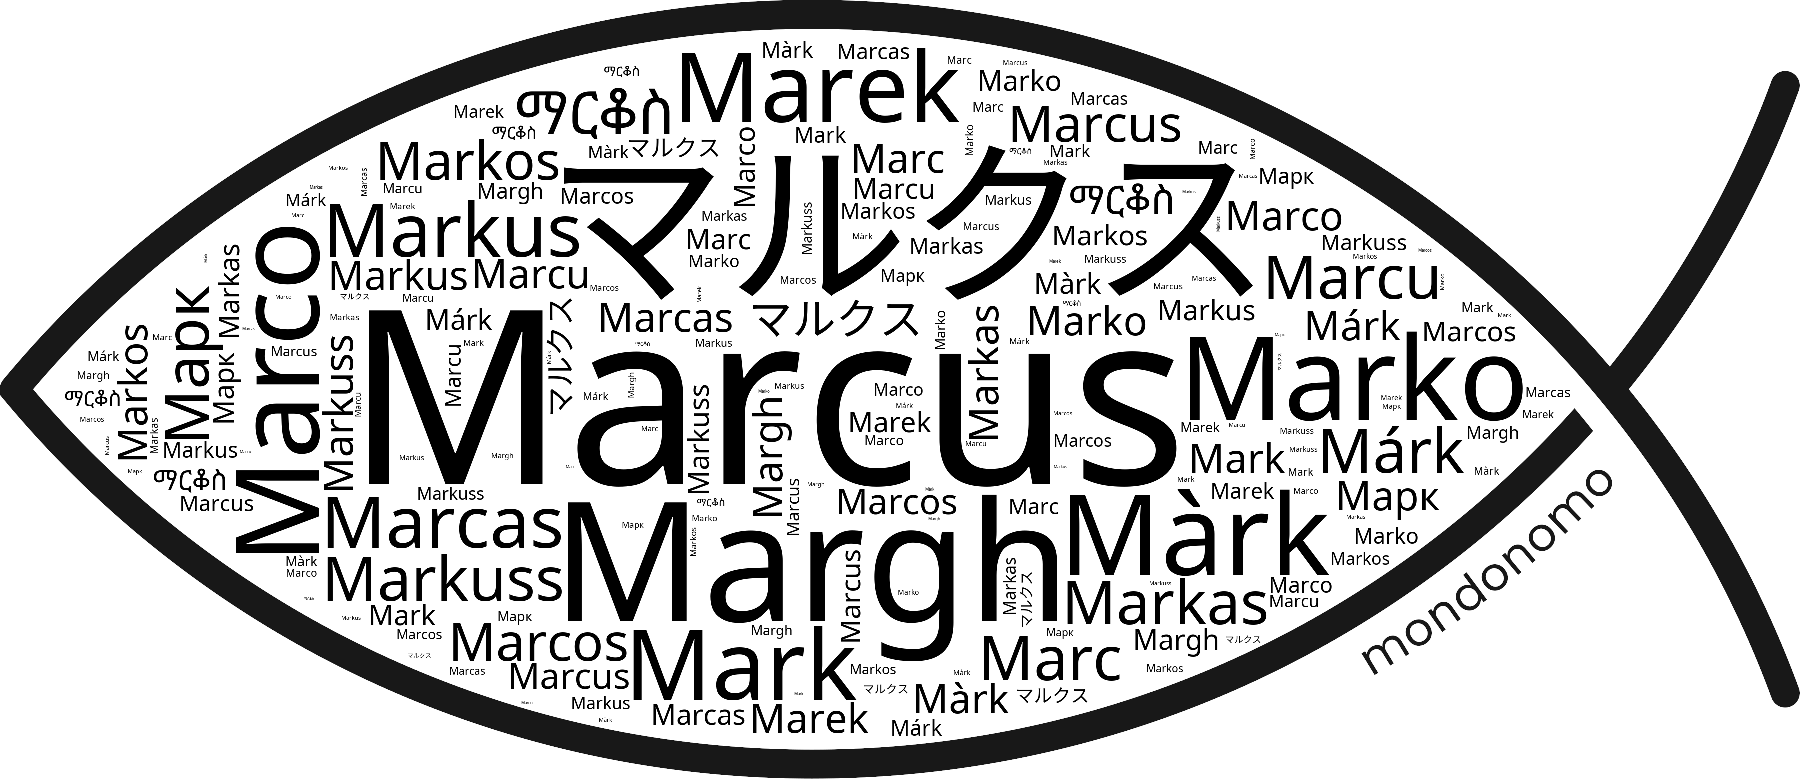 Name Marcus in the world's Bibles